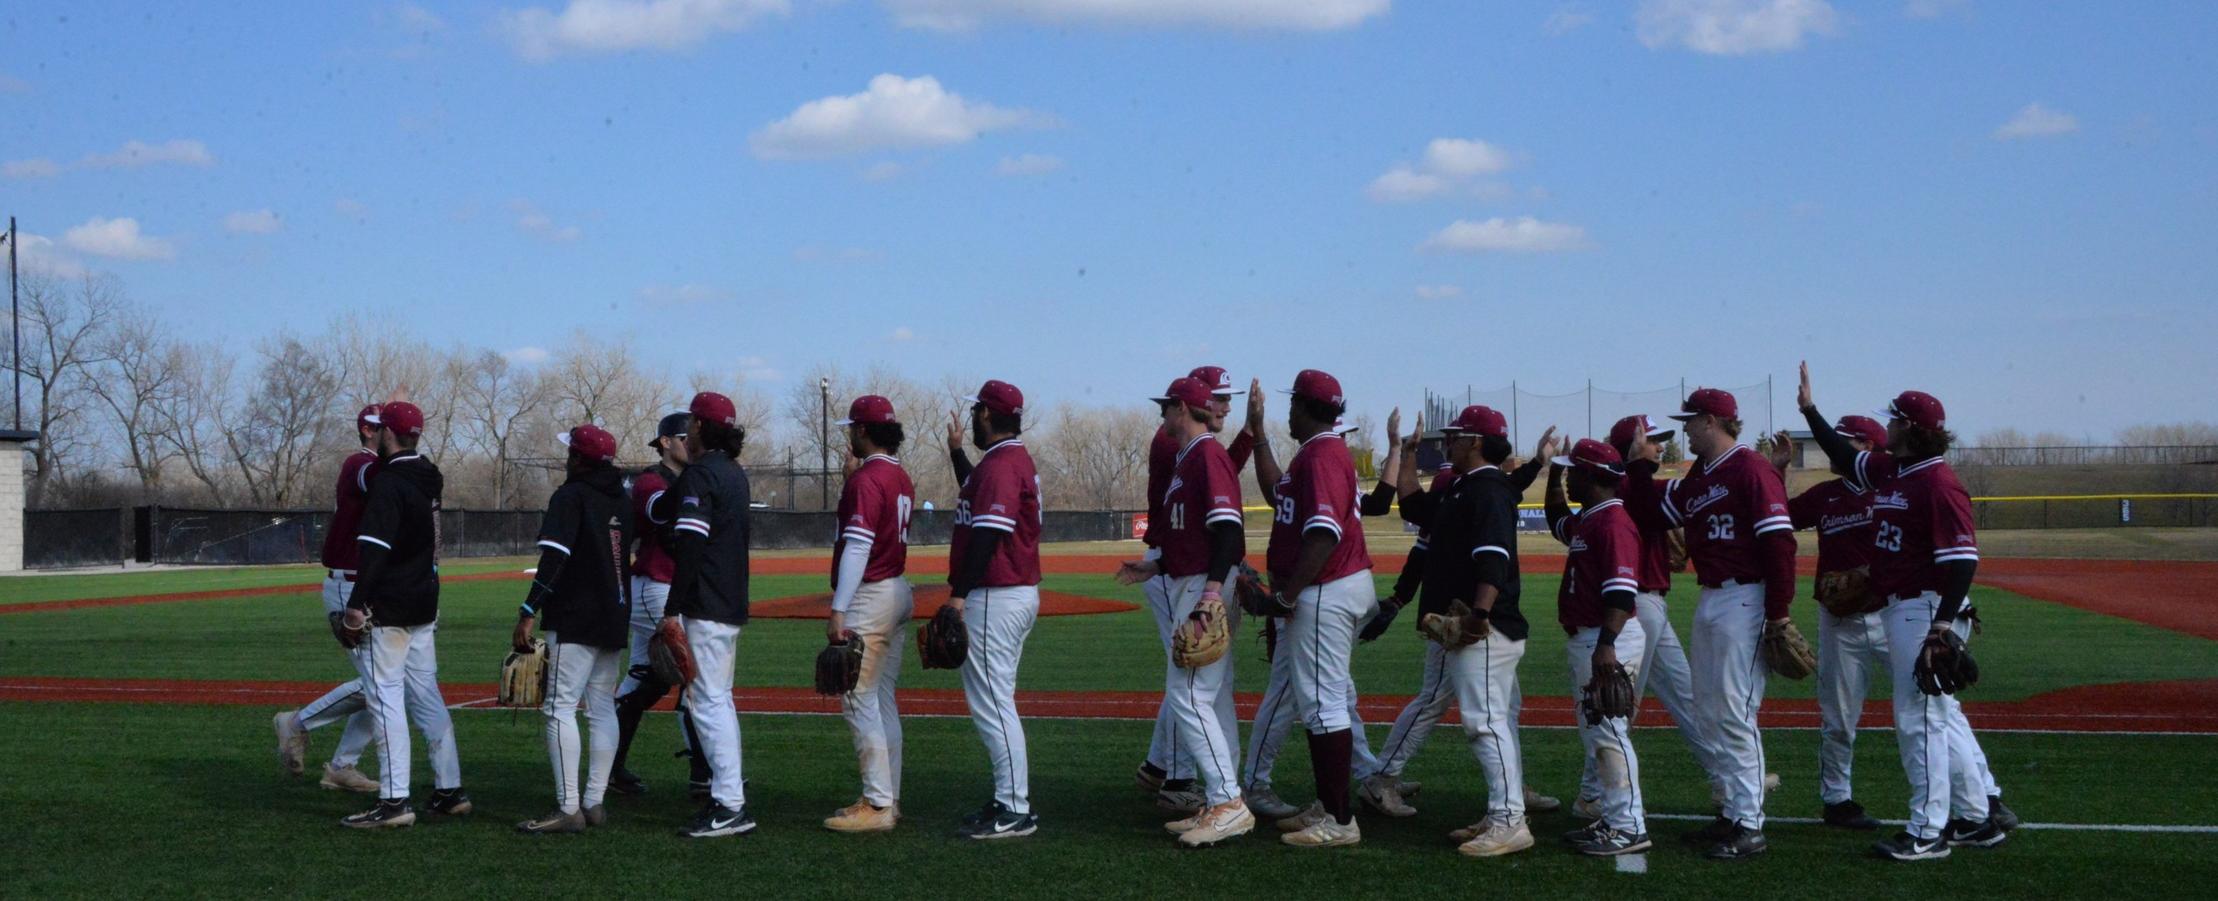 Crimson Wave Baseball ends regular season with a win and tie at Judson, securing CCAC tourney spot